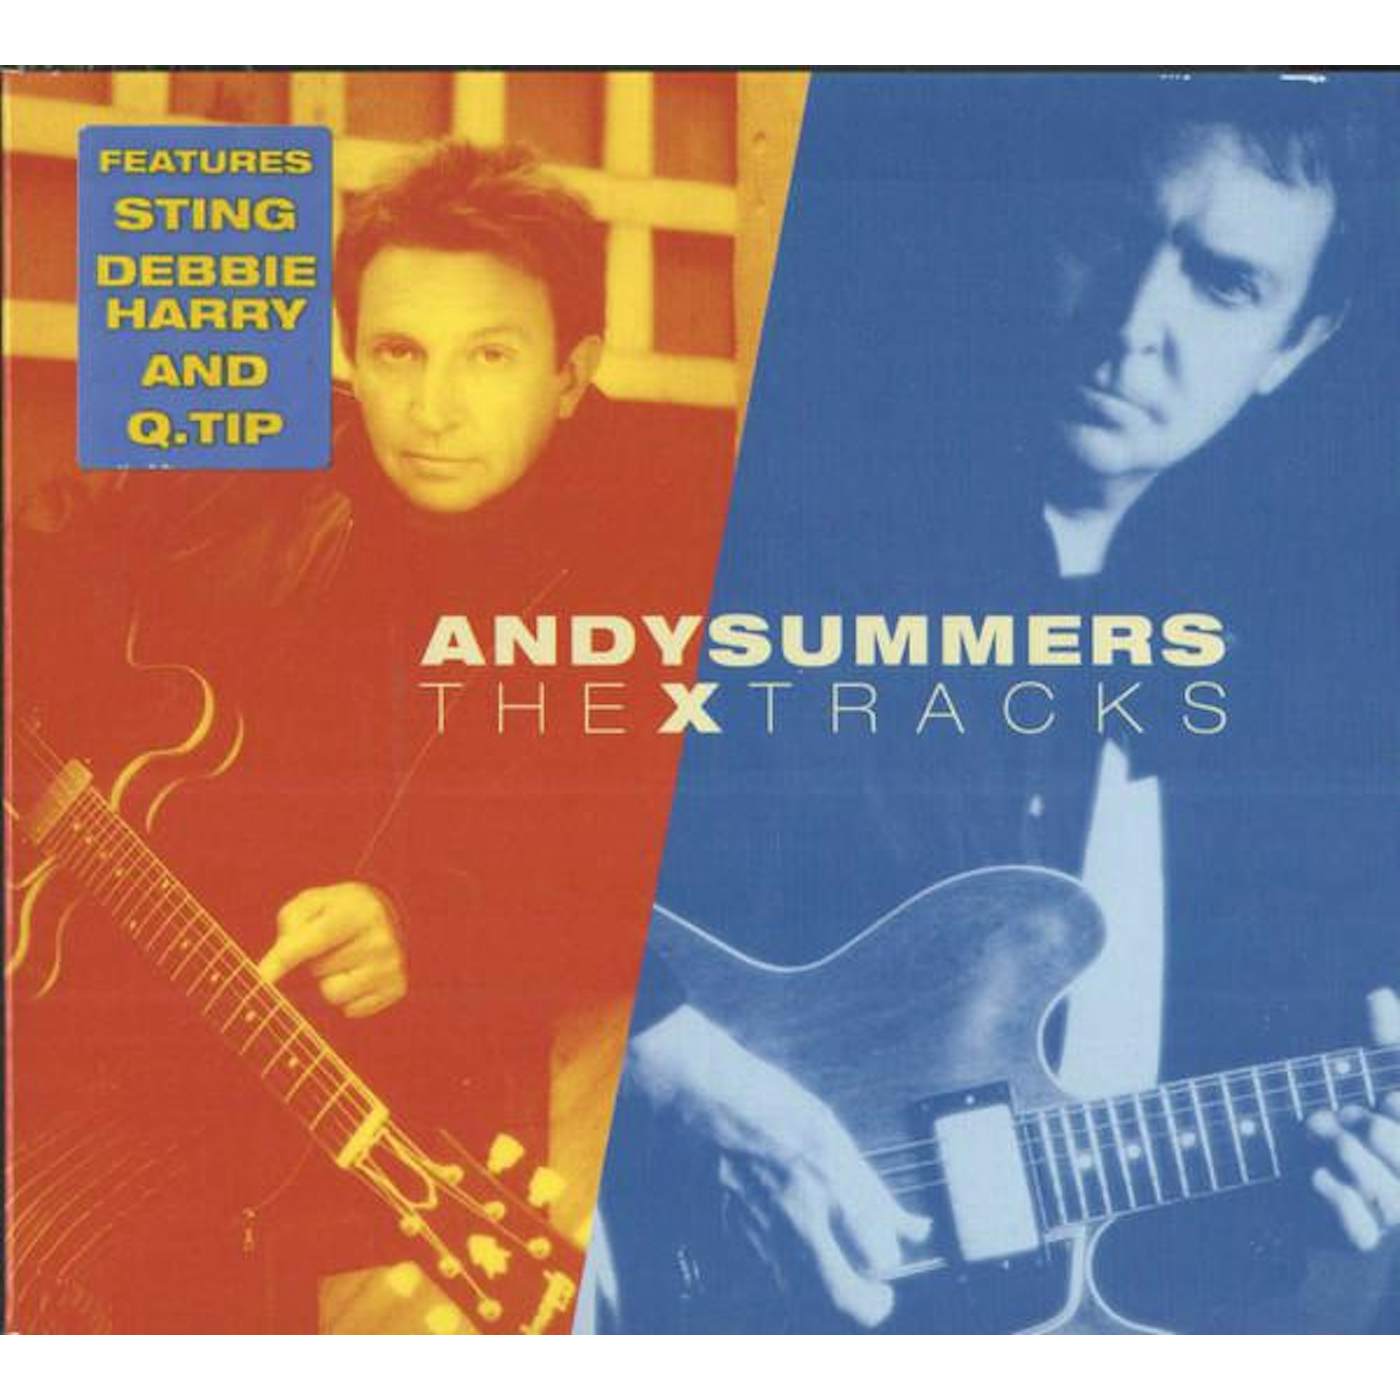 Andy Summers X TRACKS CD